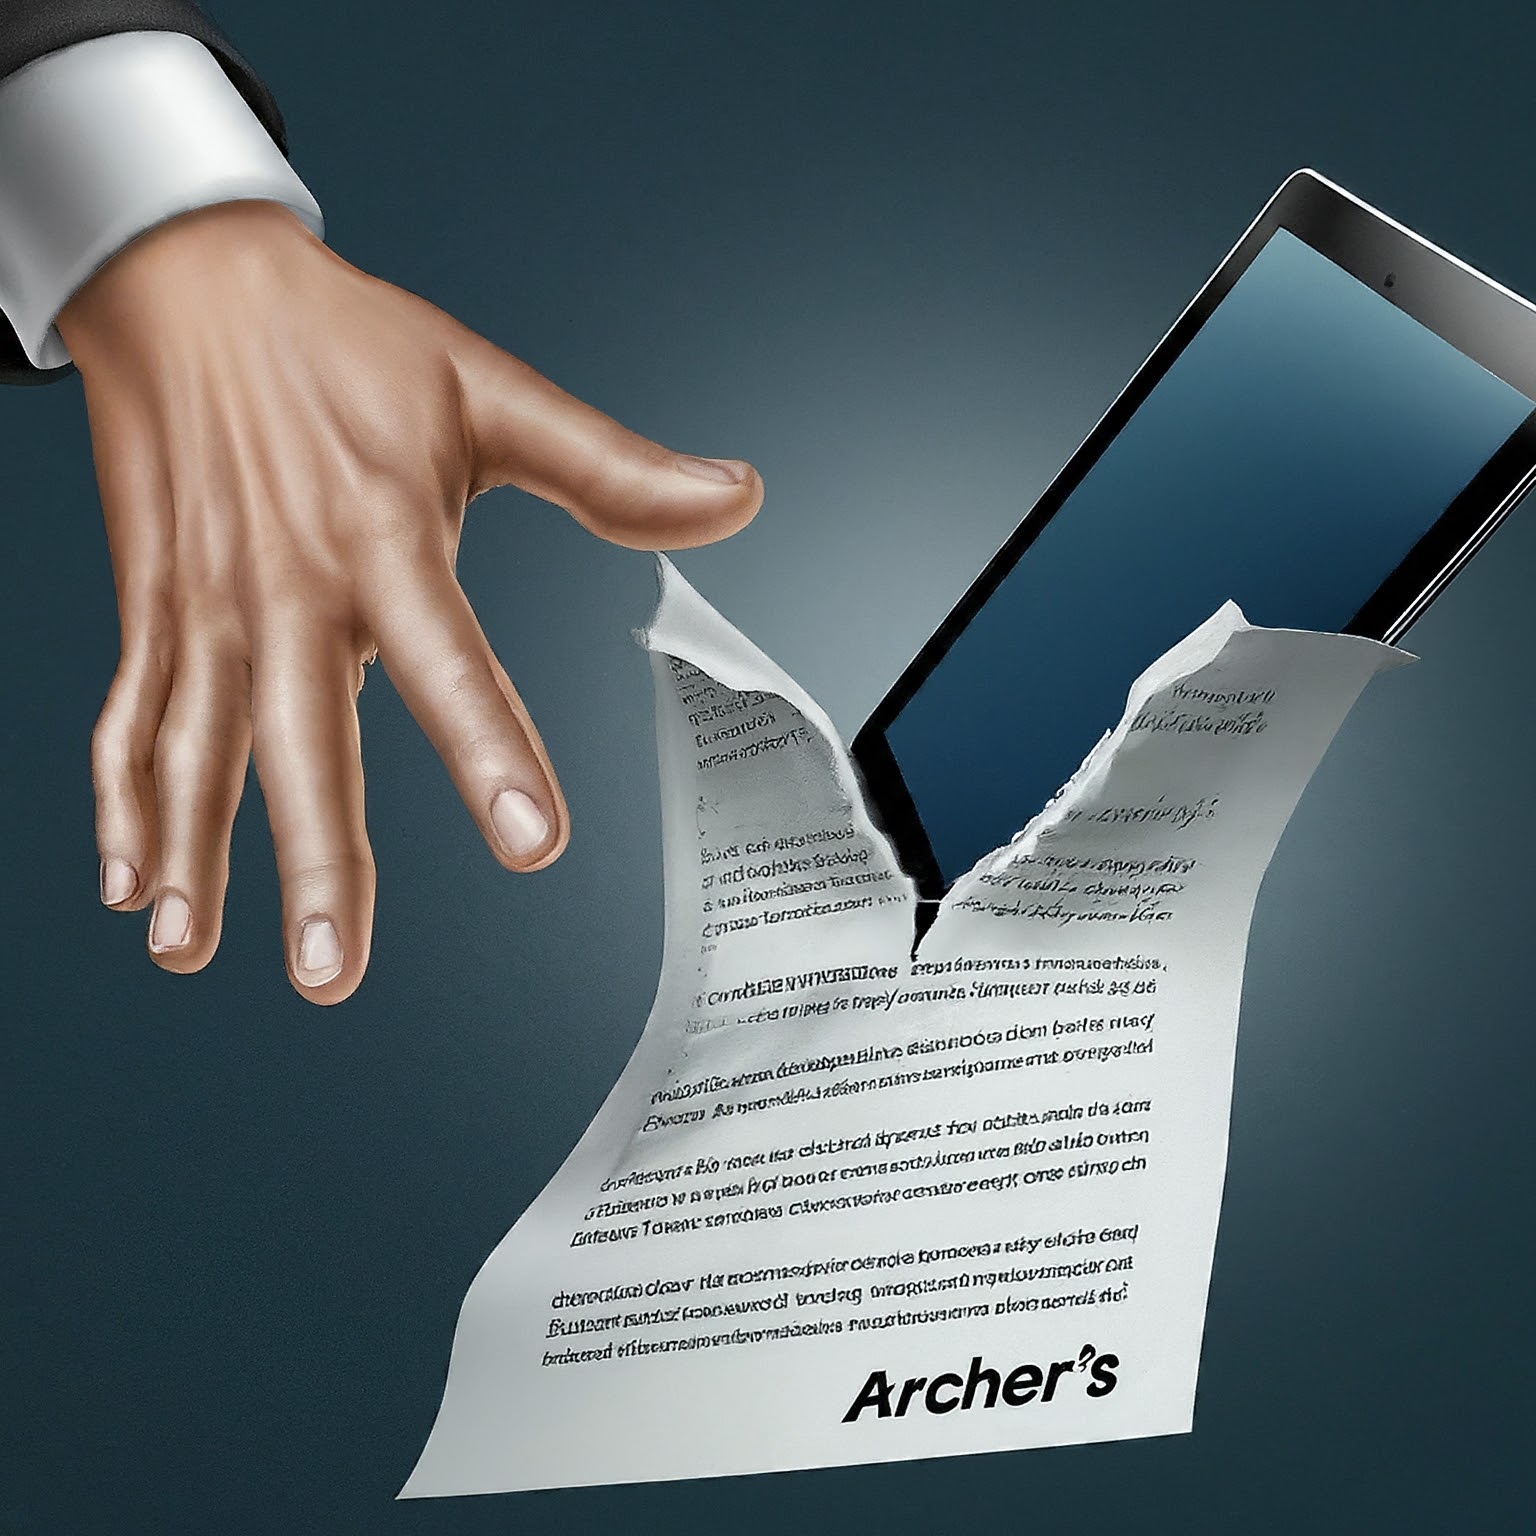 Fed Up with Your CRE CrapTech? Archer Will Buy Out Your Contract